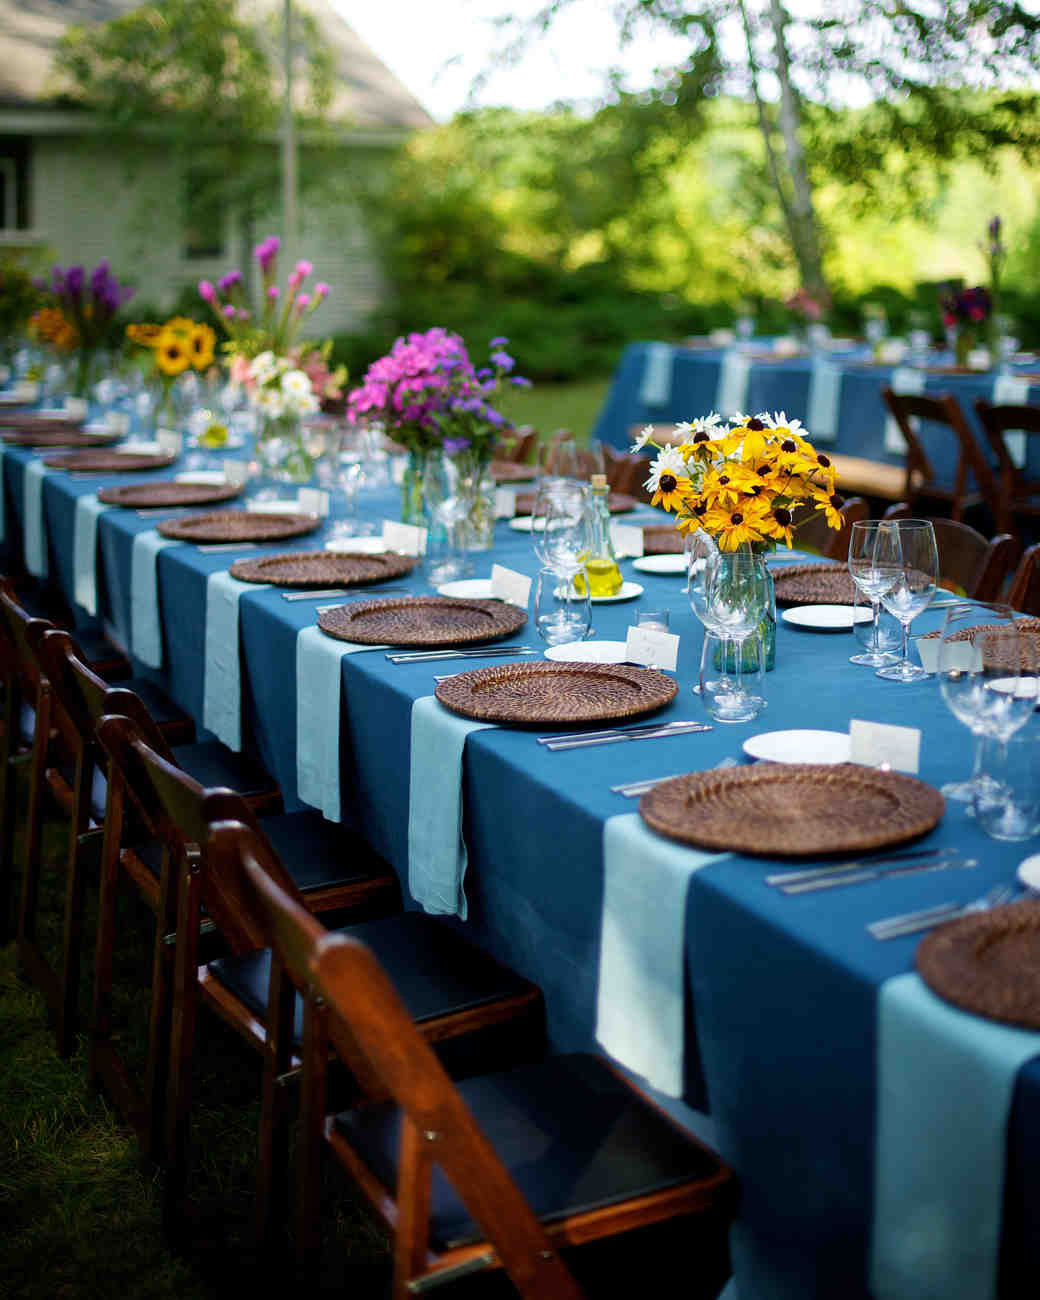 Engagement Party Ideas Martha Stewart
 How to Throw the Perfect Backyard Engagement Party